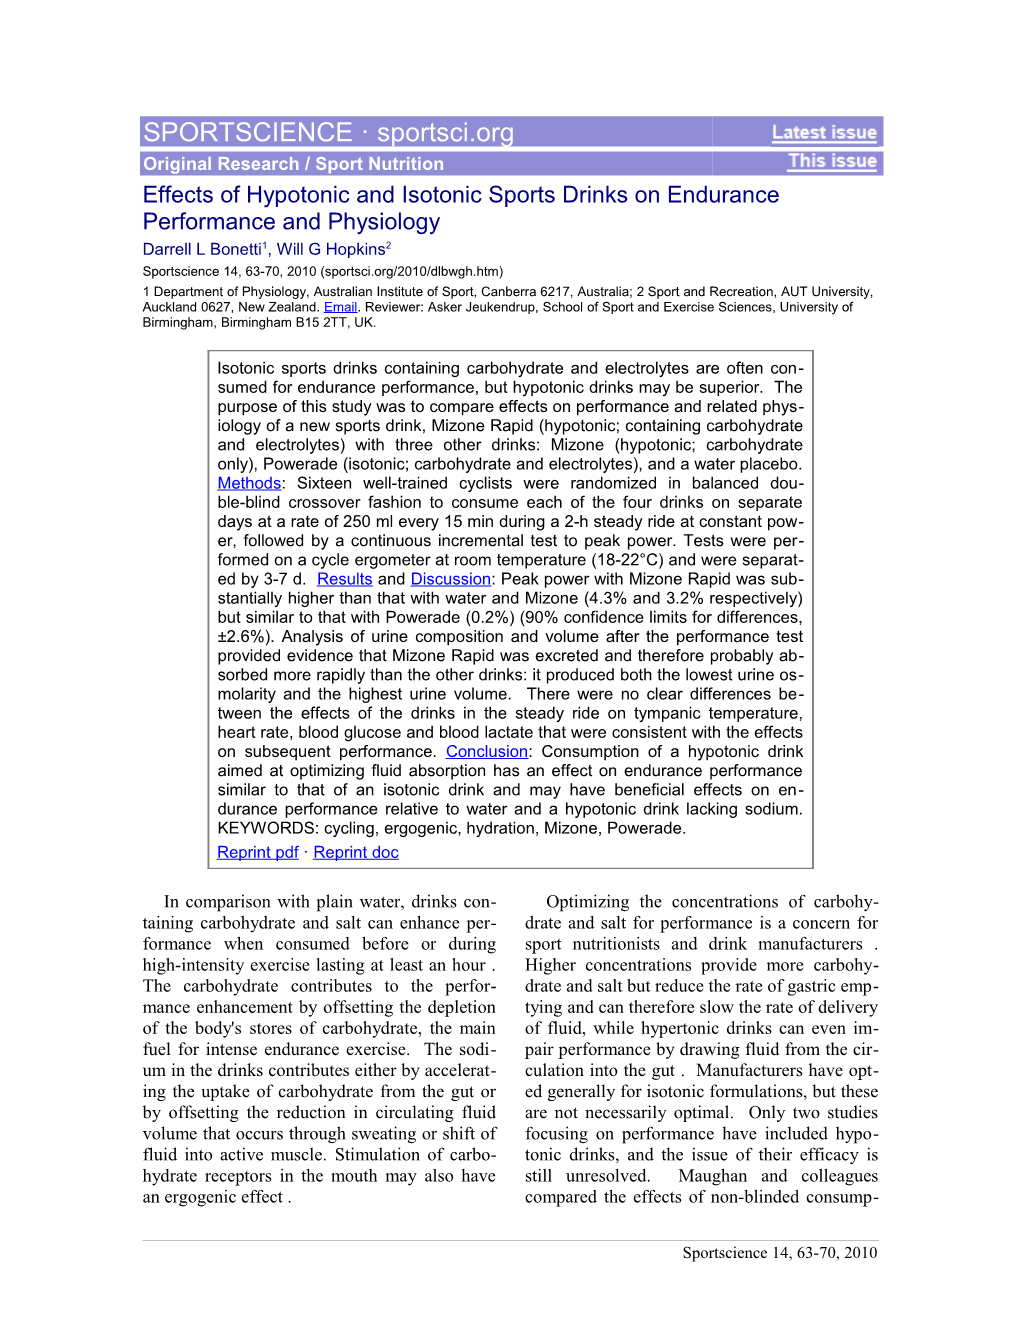 Effects of Hypotonic and Isotonic Sports Drinks on Endurance Performance and Physiology